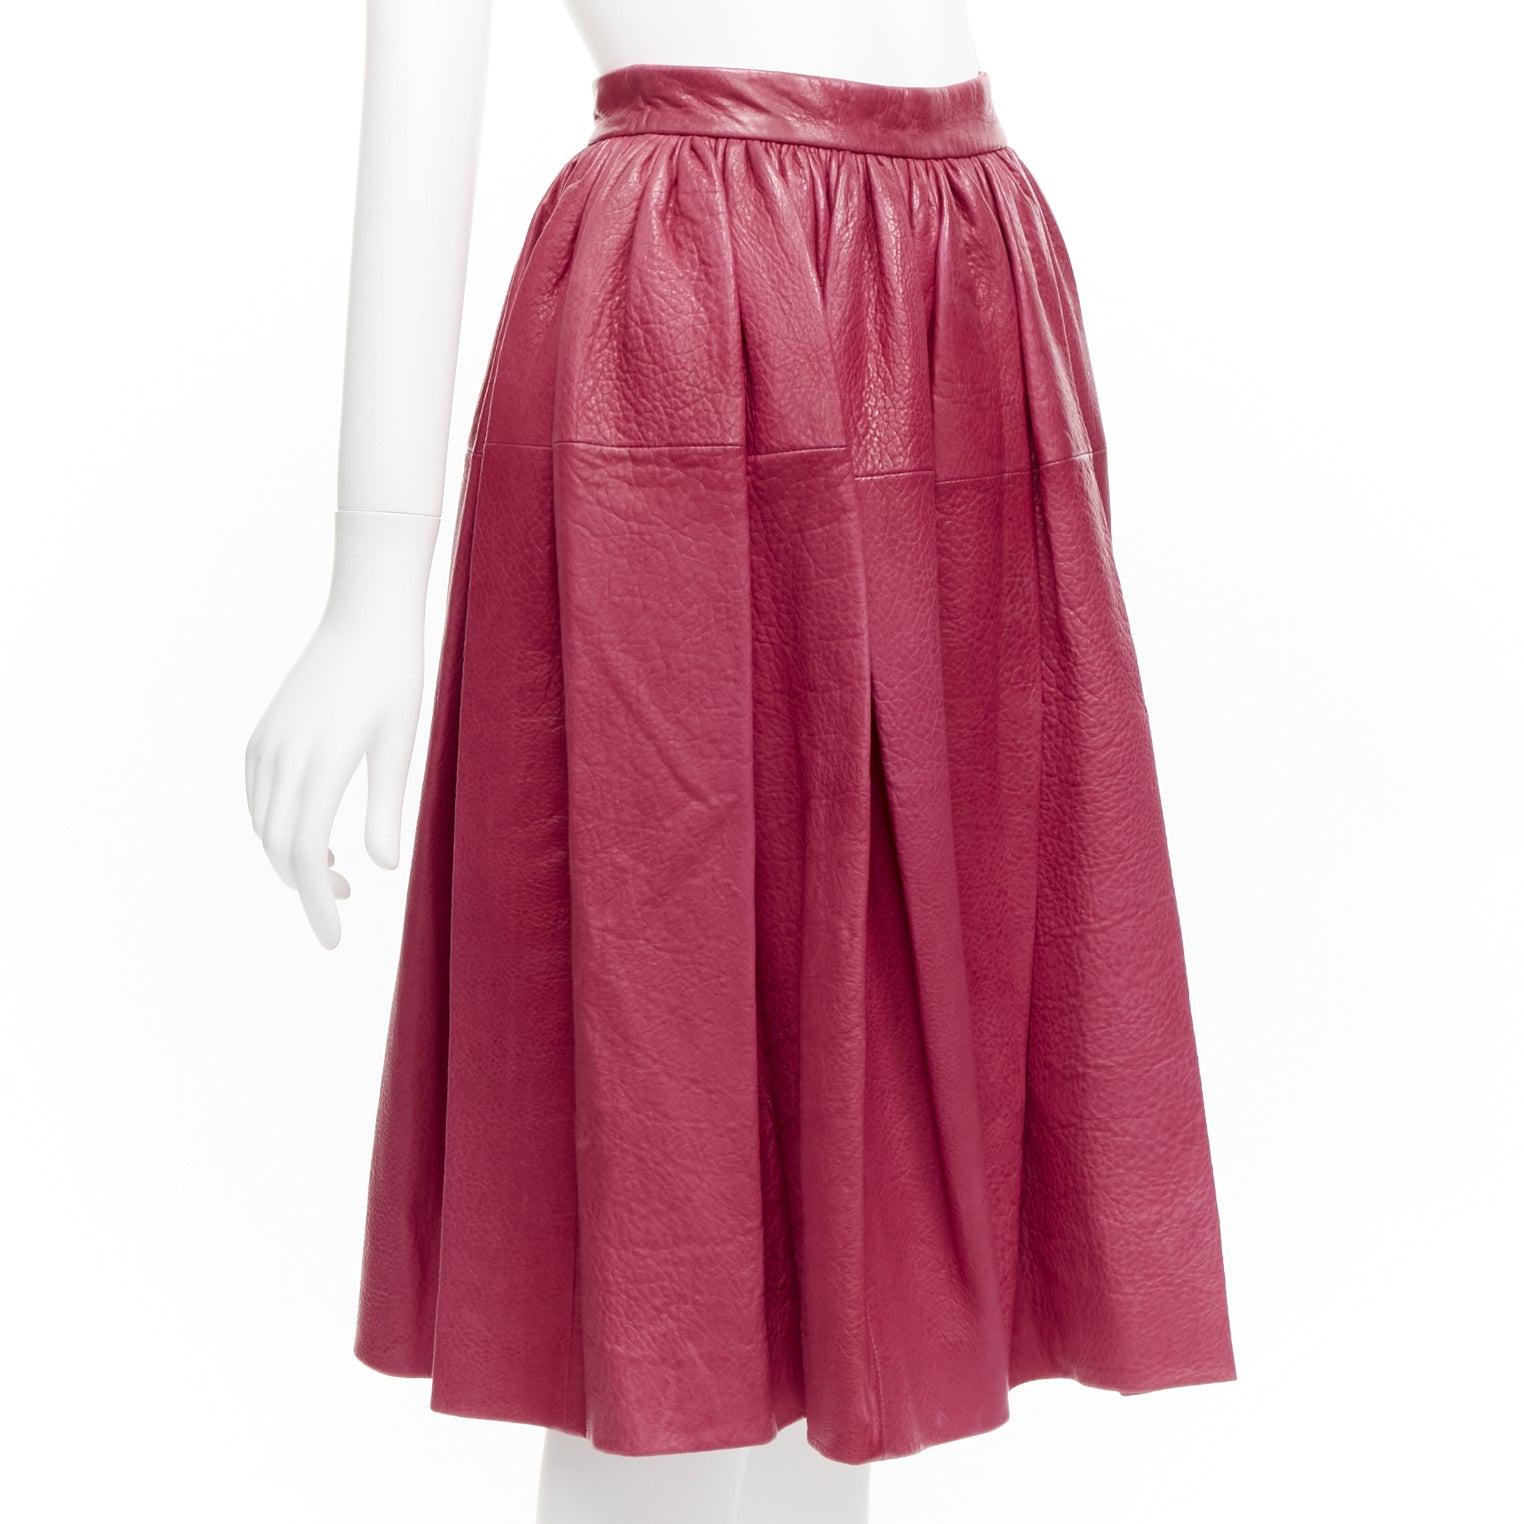 MIU MIU raspberry pink lambskin leather high waist panelled A-line table skirt IT40 S
Reference: BSHW/A00042
Brand: Miu Miu
Designer: Miuccia Prada
Material: Lambskin Leather
Color: Pink
Pattern: Solid
Closure: Zip
Lining: Pink Fabric
Extra Details: